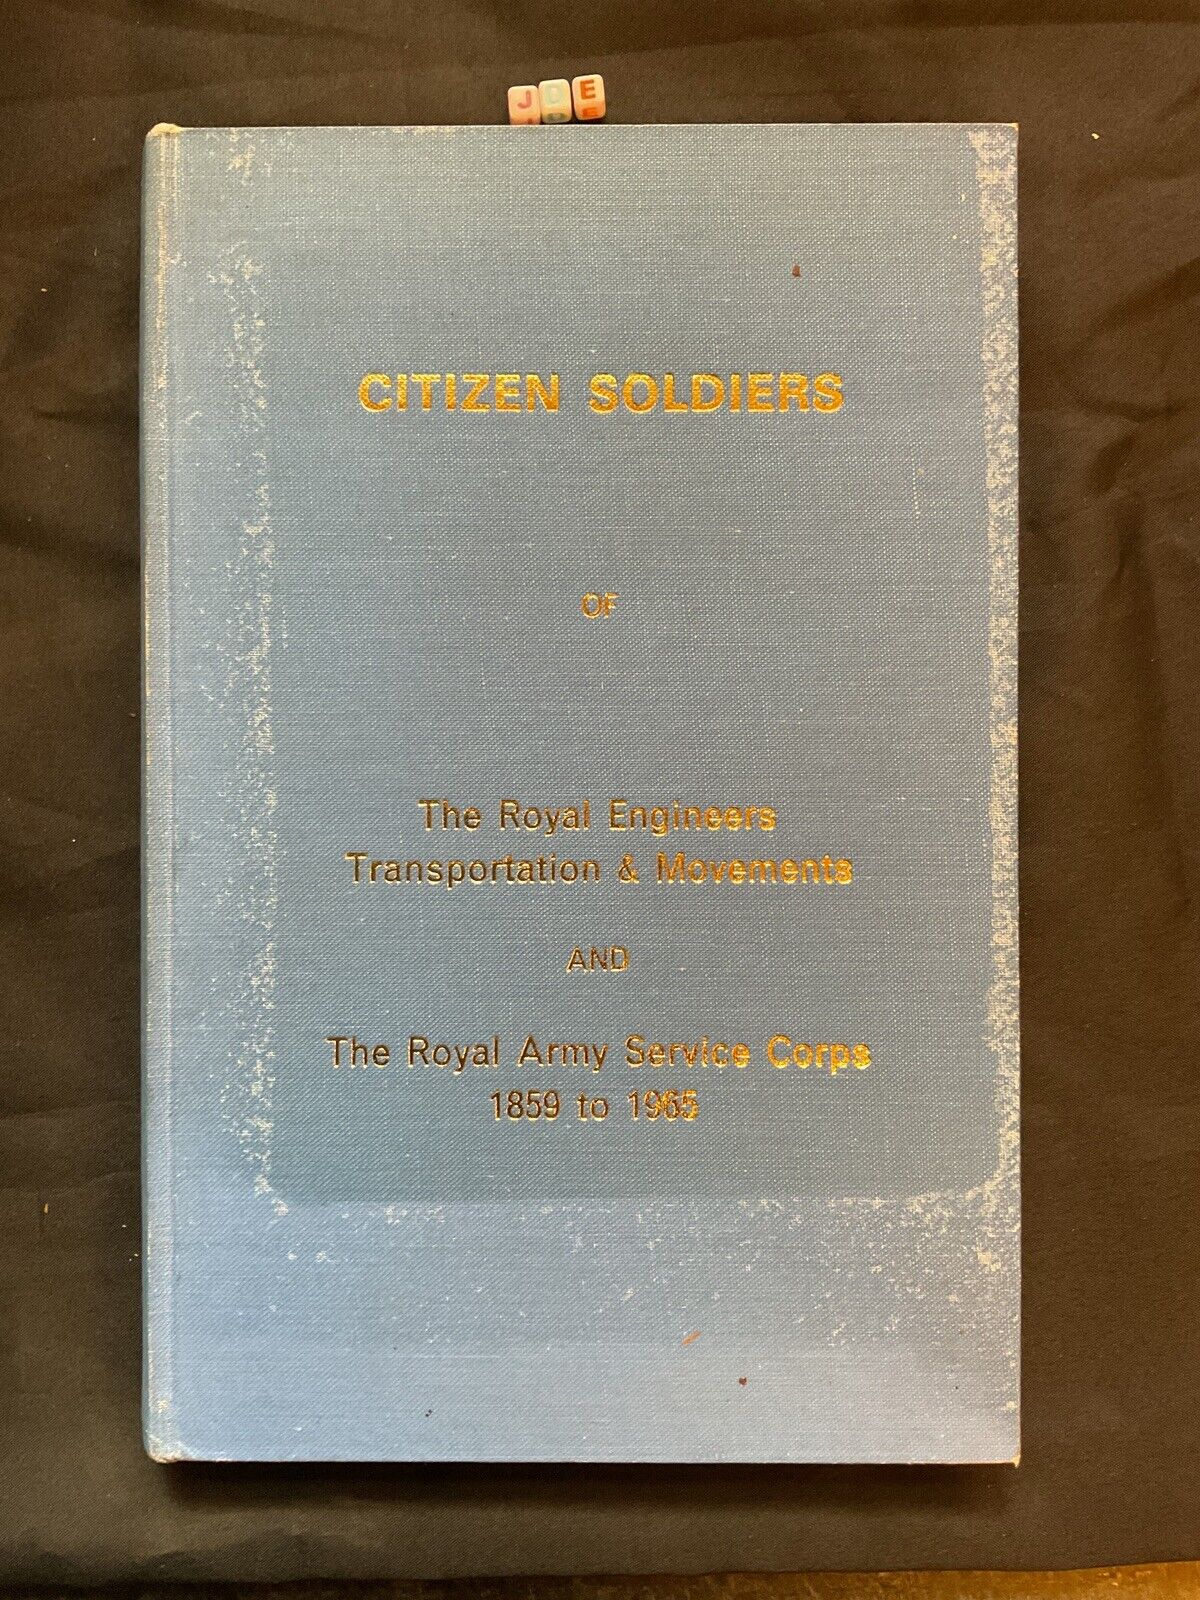 CITIZEN SOLDIERS OF THE ROYAL ENGINEERS TRANSPORTATION & MOVEMENTS  BOOK